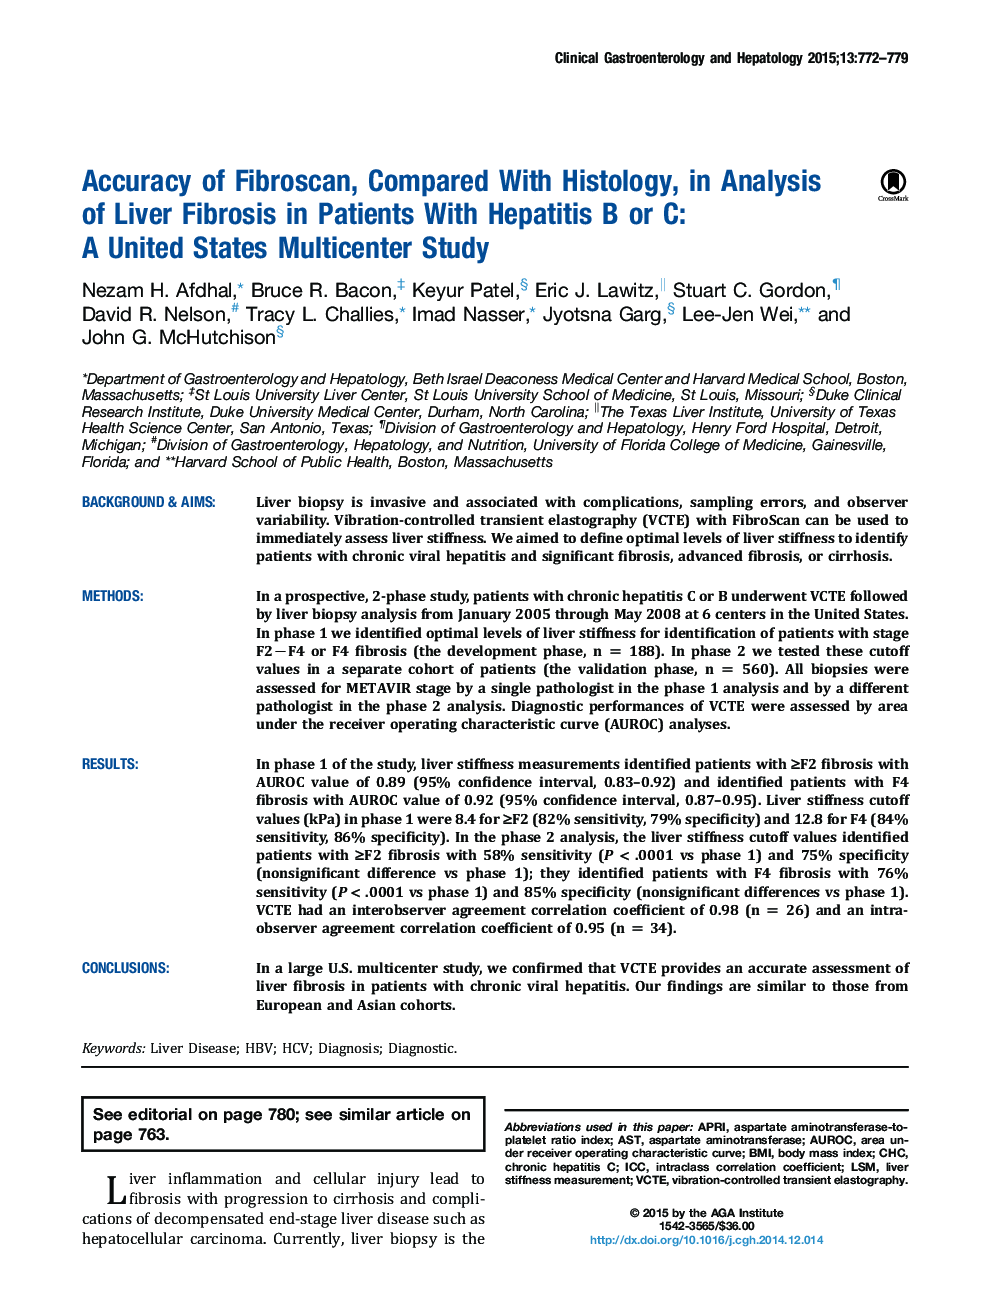 Accuracy of Fibroscan, Compared With Histology, in Analysis of Liver Fibrosis in Patients With Hepatitis B or C: A United States Multicenter Study